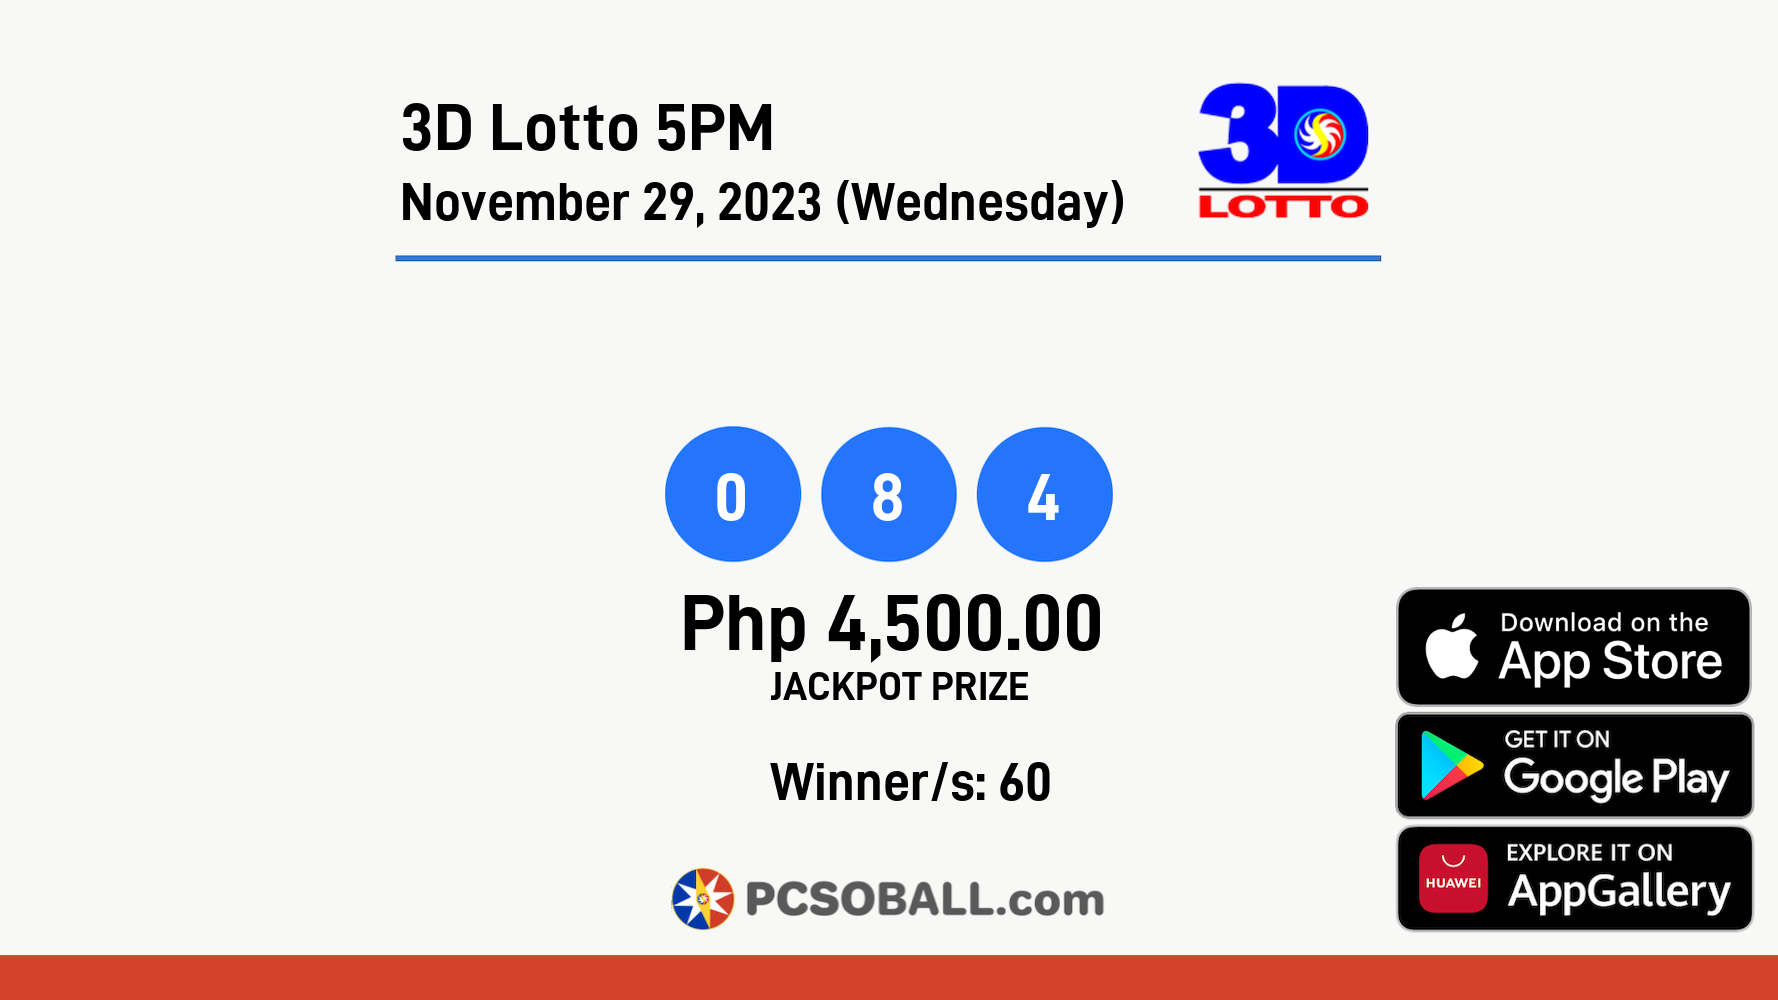 3D Lotto 5PM November 29, 2023 (Wednesday) Result